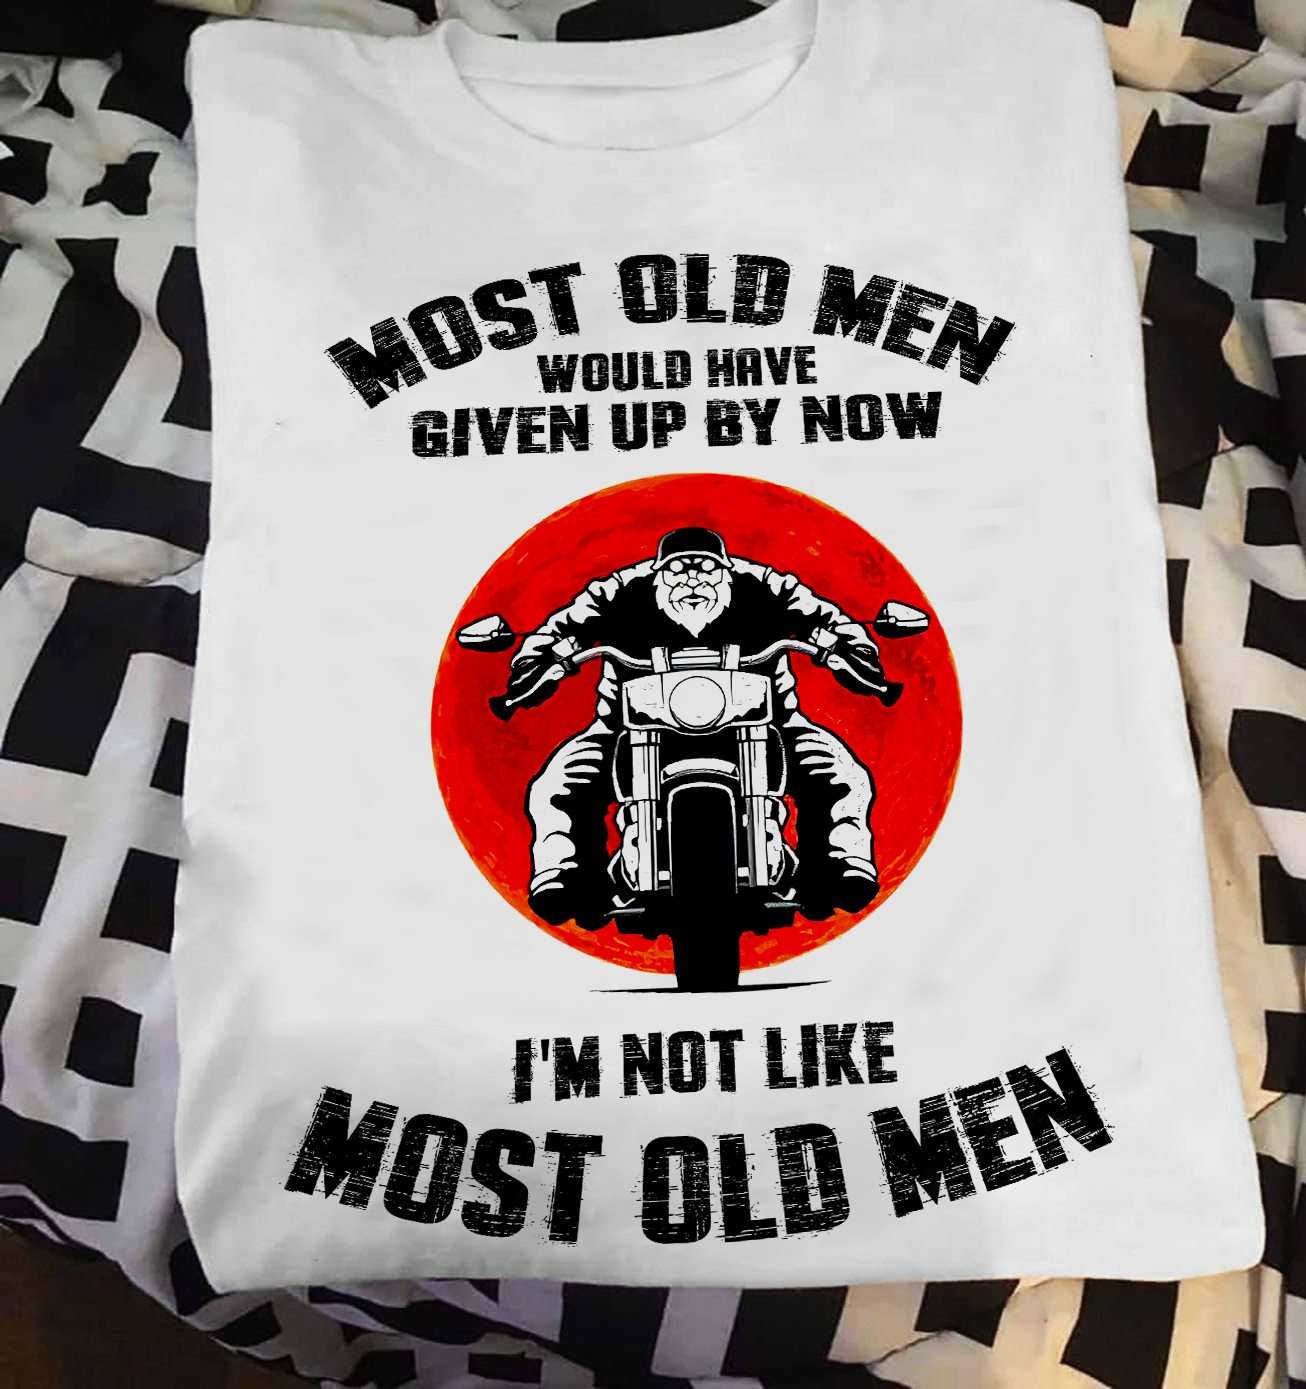 Most old men would have given up by now I'm not like most old men - Old man motorcycle, motorcycle old guy T-shirt